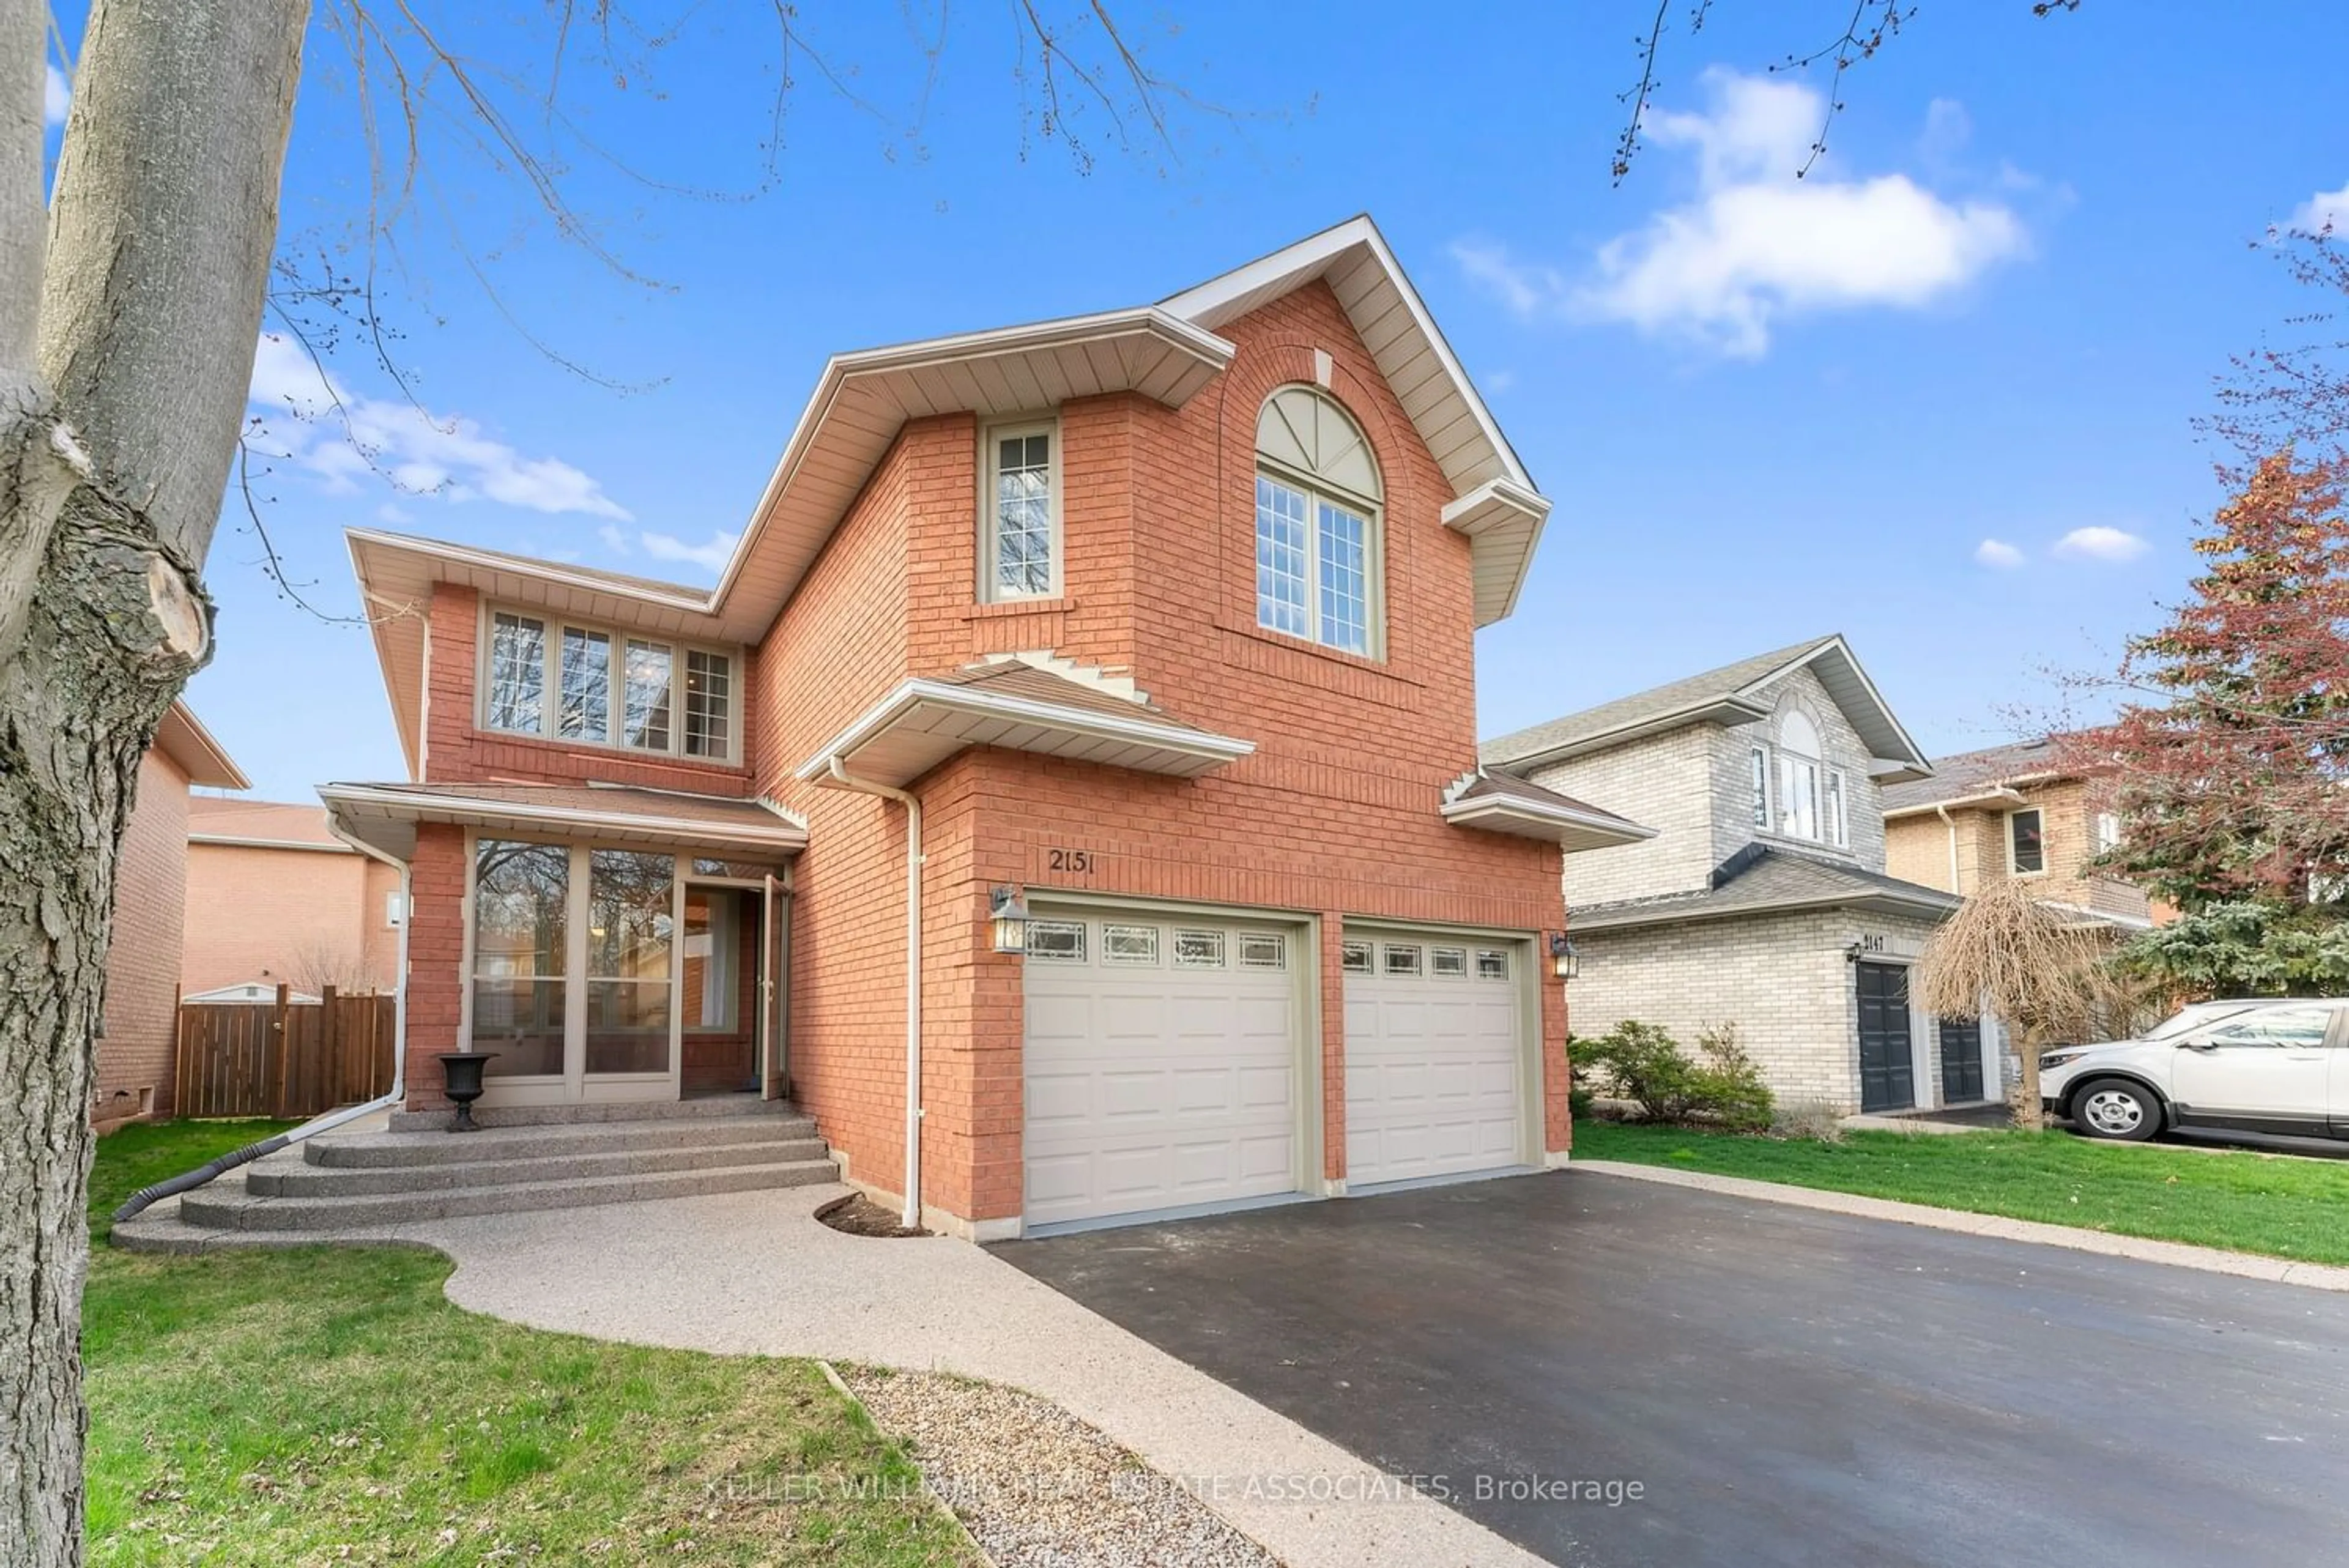 Home with brick exterior material for 2151 Grand Ravine Dr, Oakville Ontario L6H 6B3